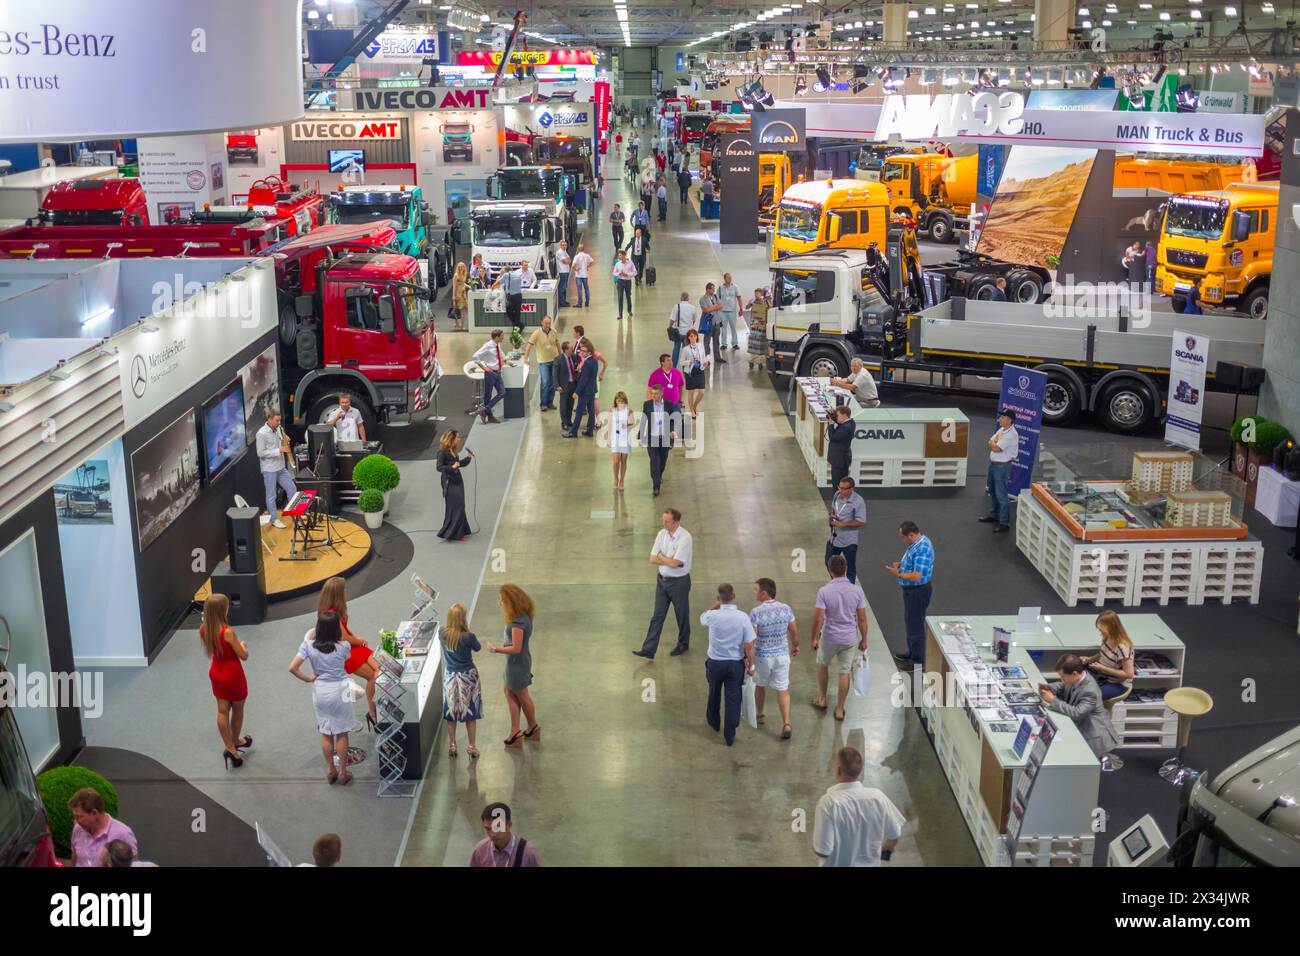 MOSCOW, RUSSIA - JUN 06, 2014: big auto trade show commercial vehicle manufacturers of famous brands on International Specialized Exhibition of Constr Stock Photo